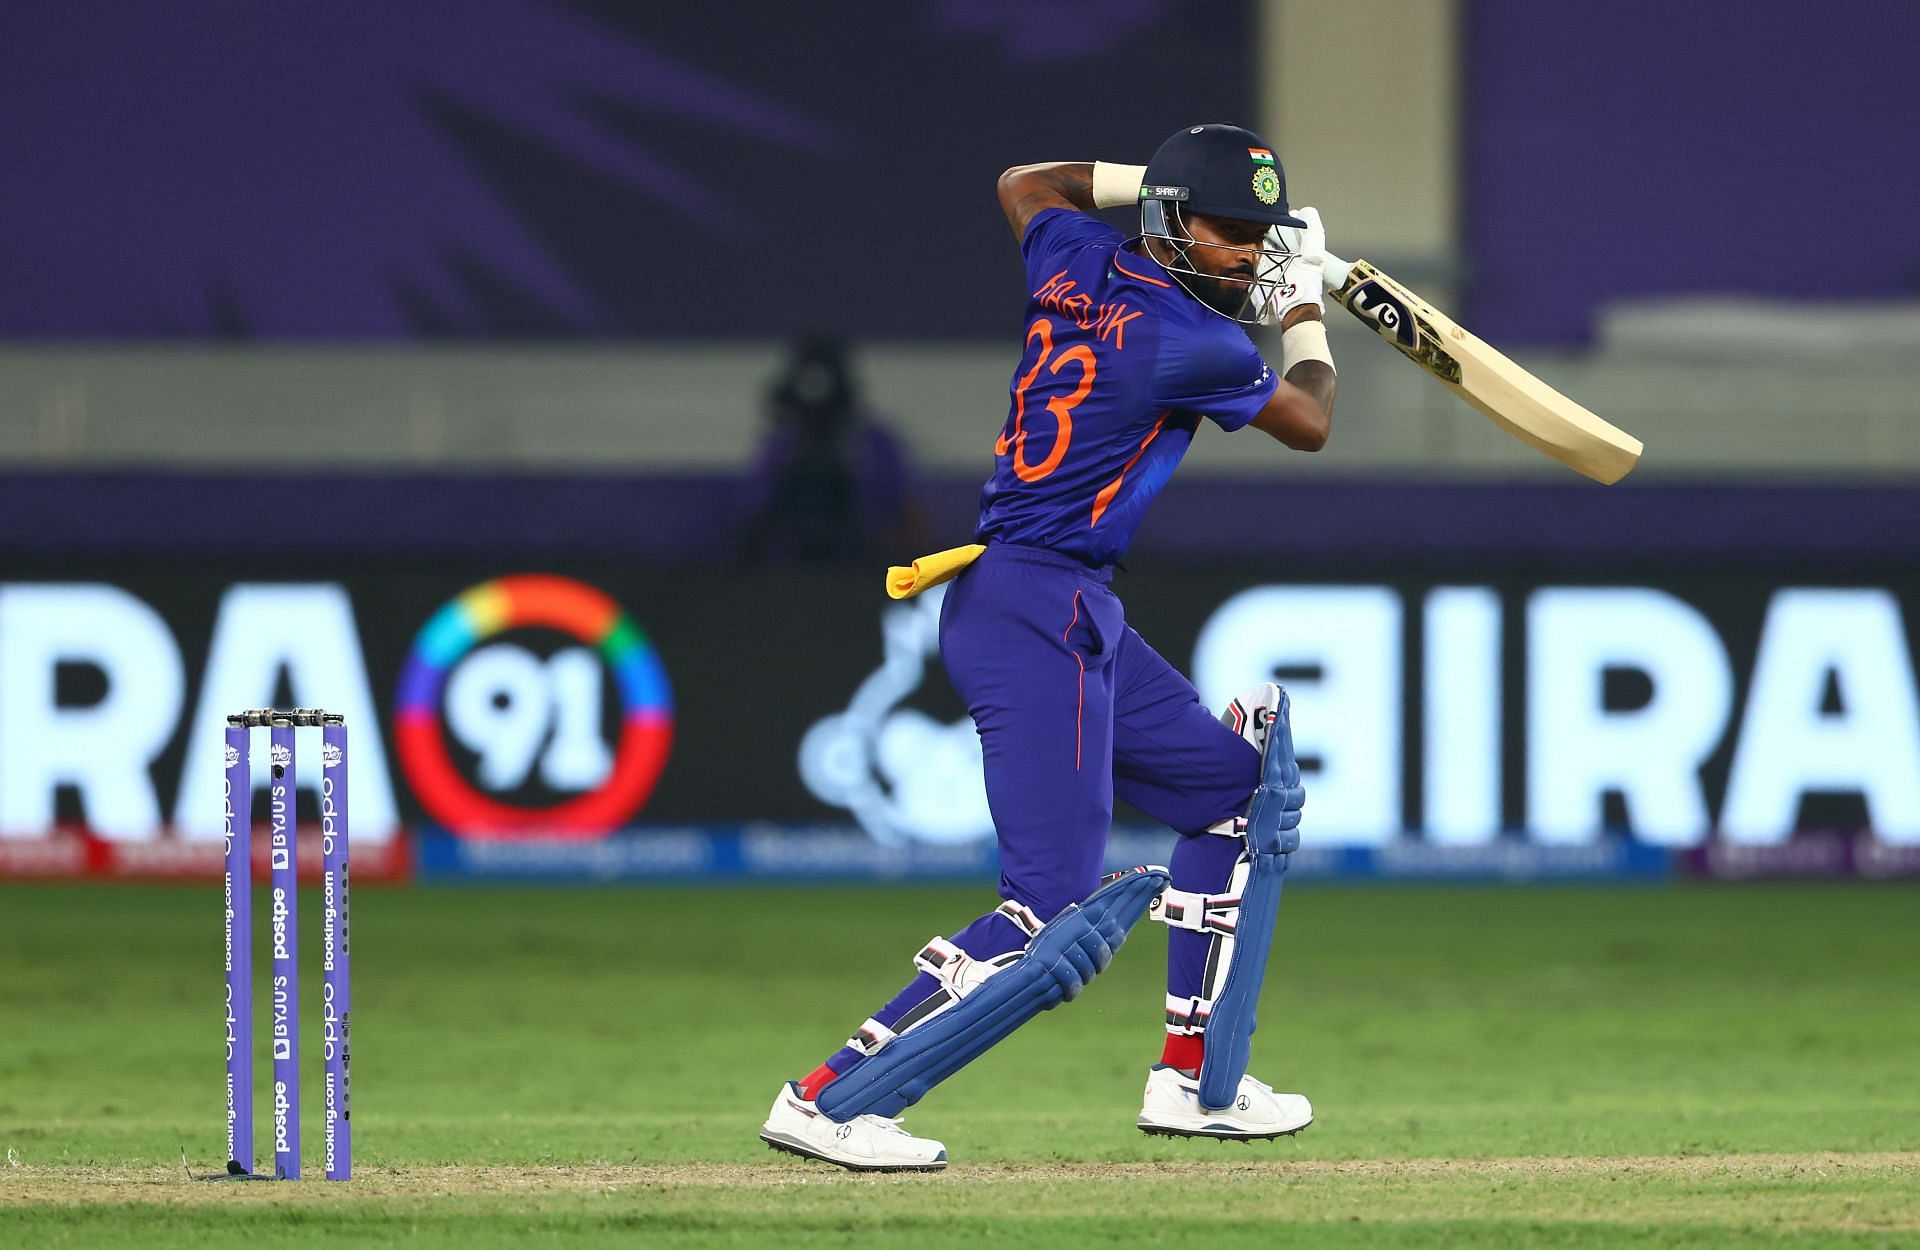 Hardik Pandya has staged a comeback into the Indian team based on his performances in IPL 2022